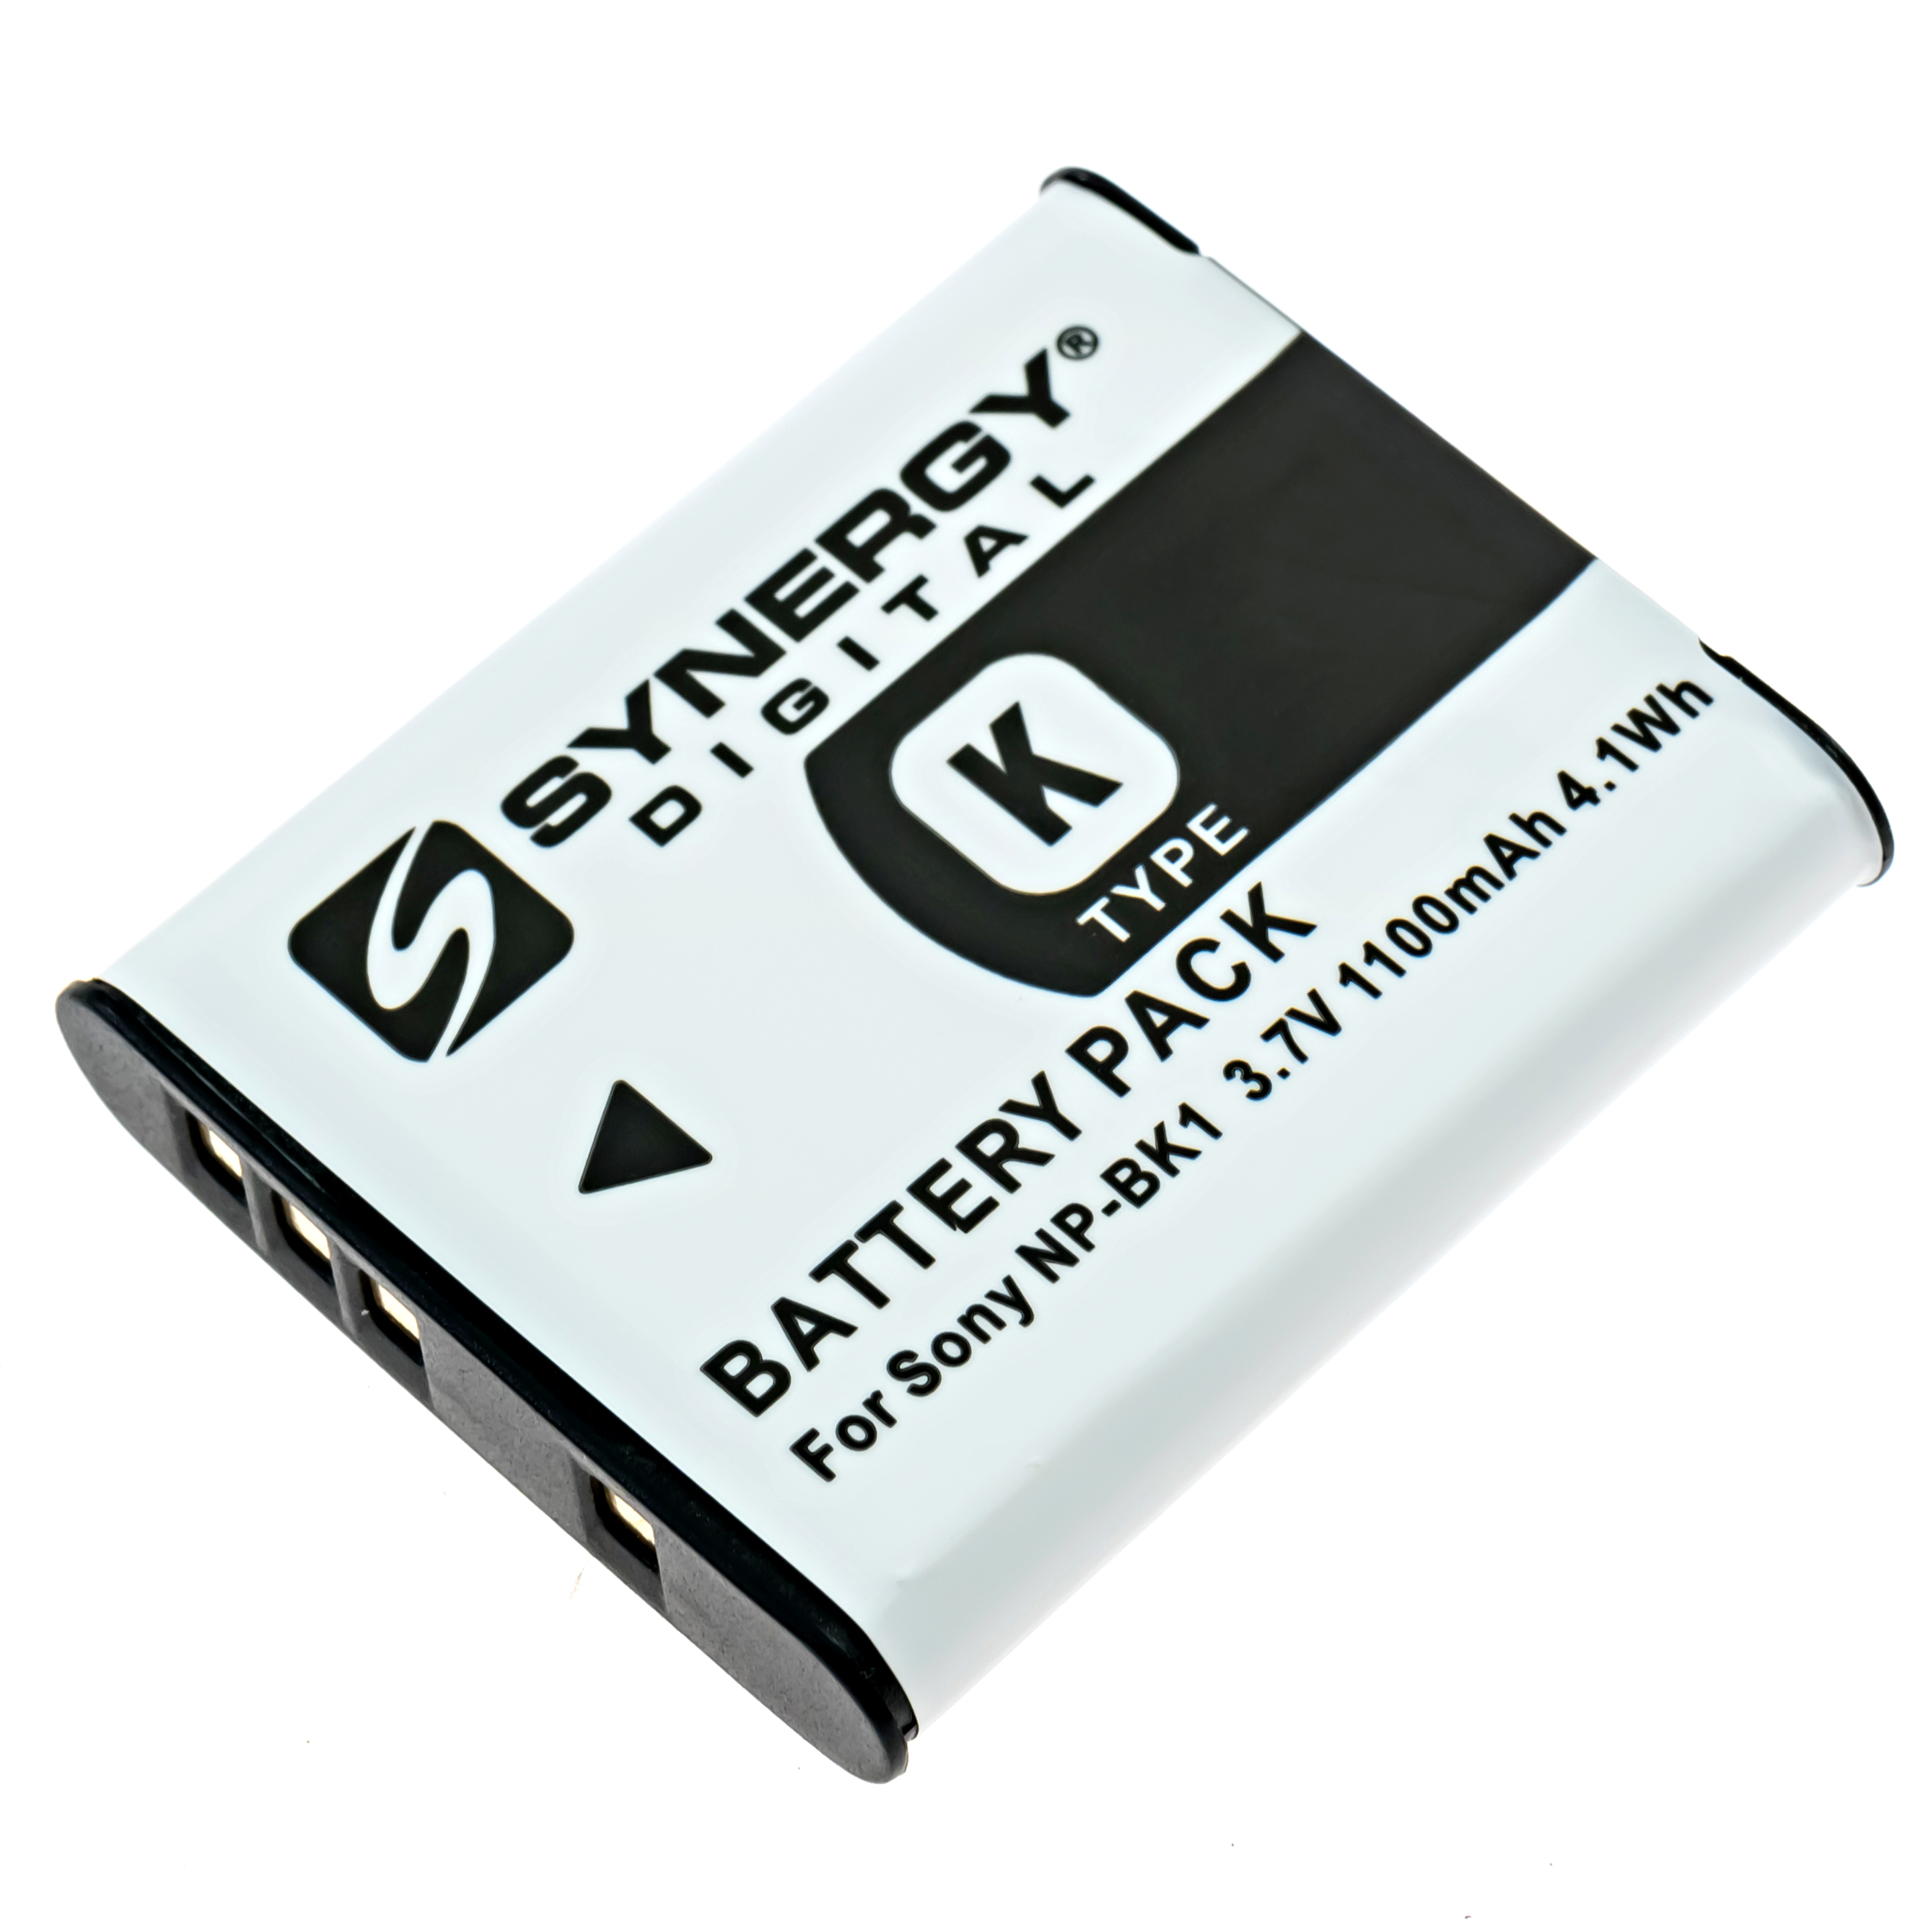 SDNPBK1 Lithium-Ion Battery - Rechargeable Ultra High Capacity (3.7V 1100 mAh) - Replacement for Sony NP-BK1 Battery